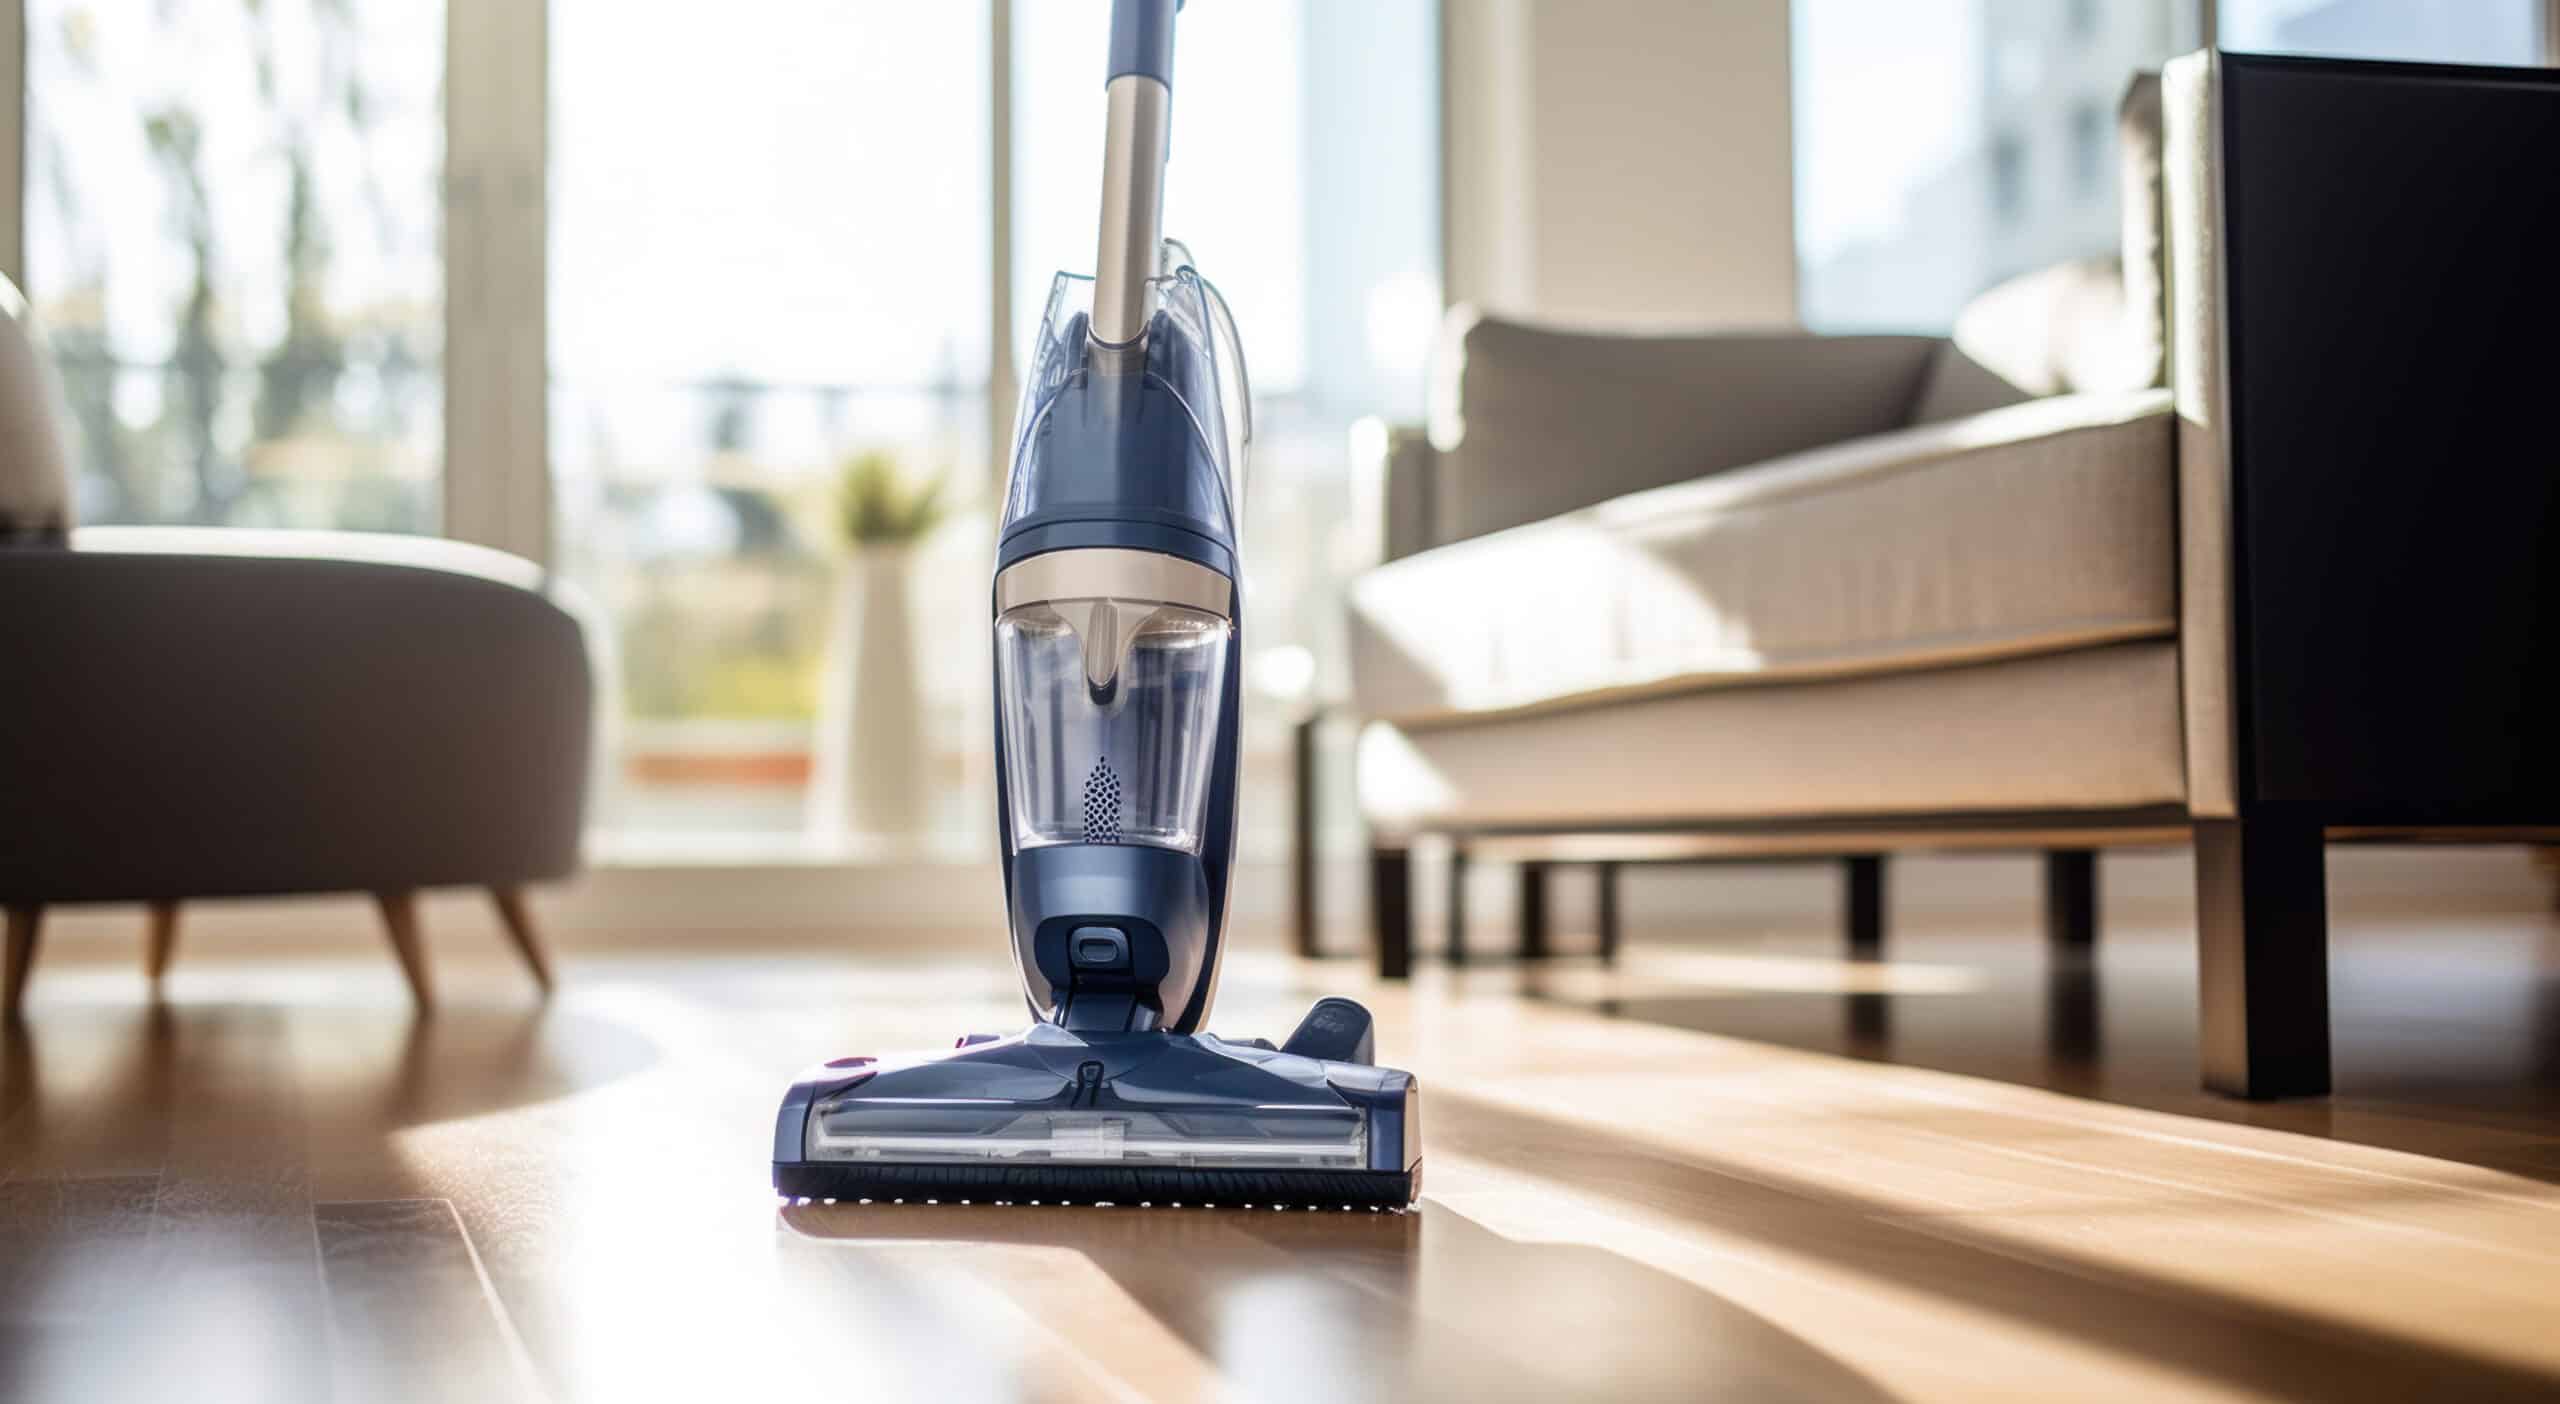 www.appr.com : How To Clean A Vacuum Cleaner?